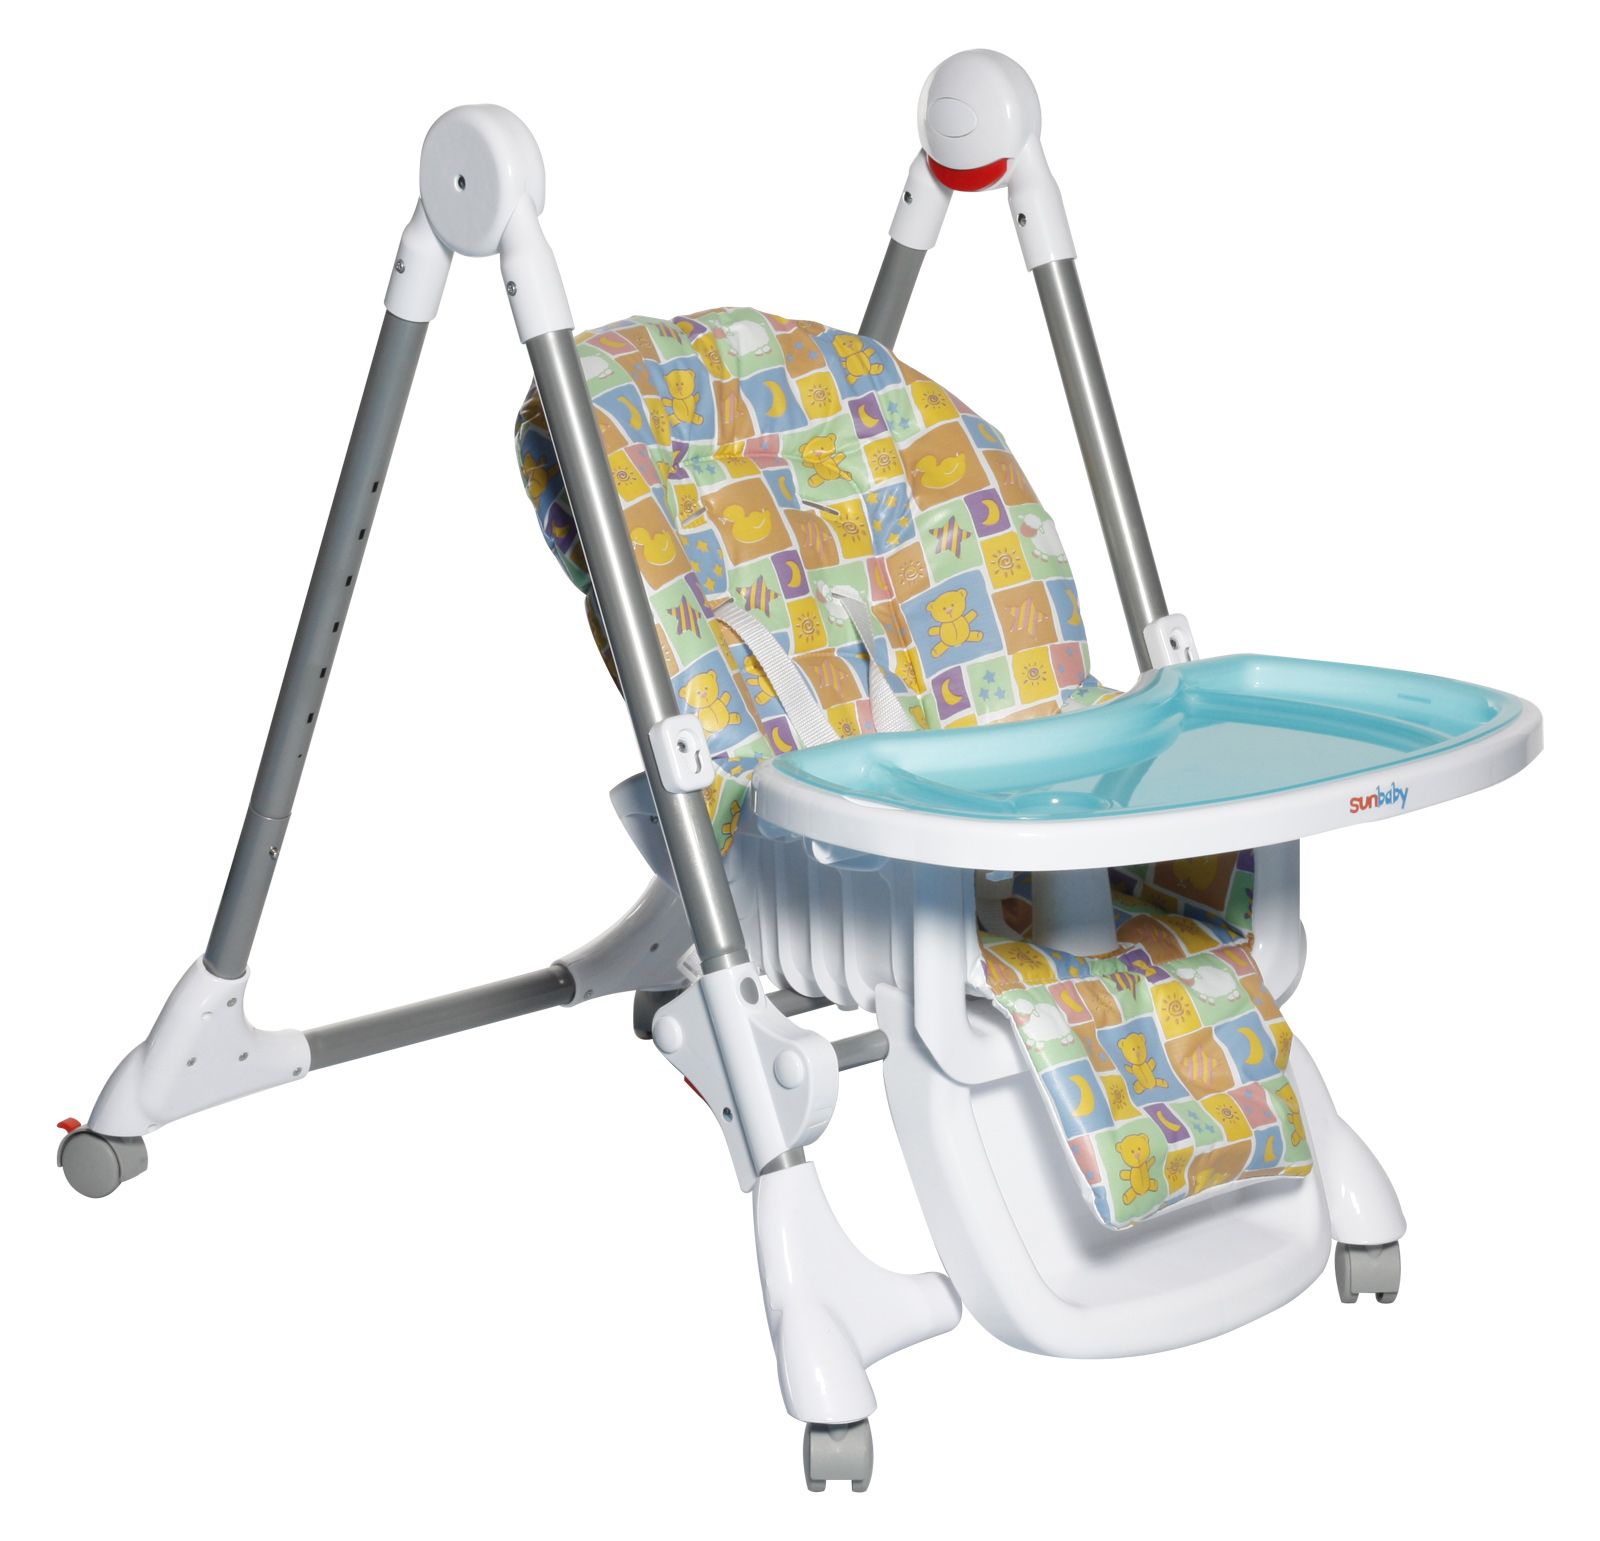 Sunbaby - Deluxe High Chair (Blue)